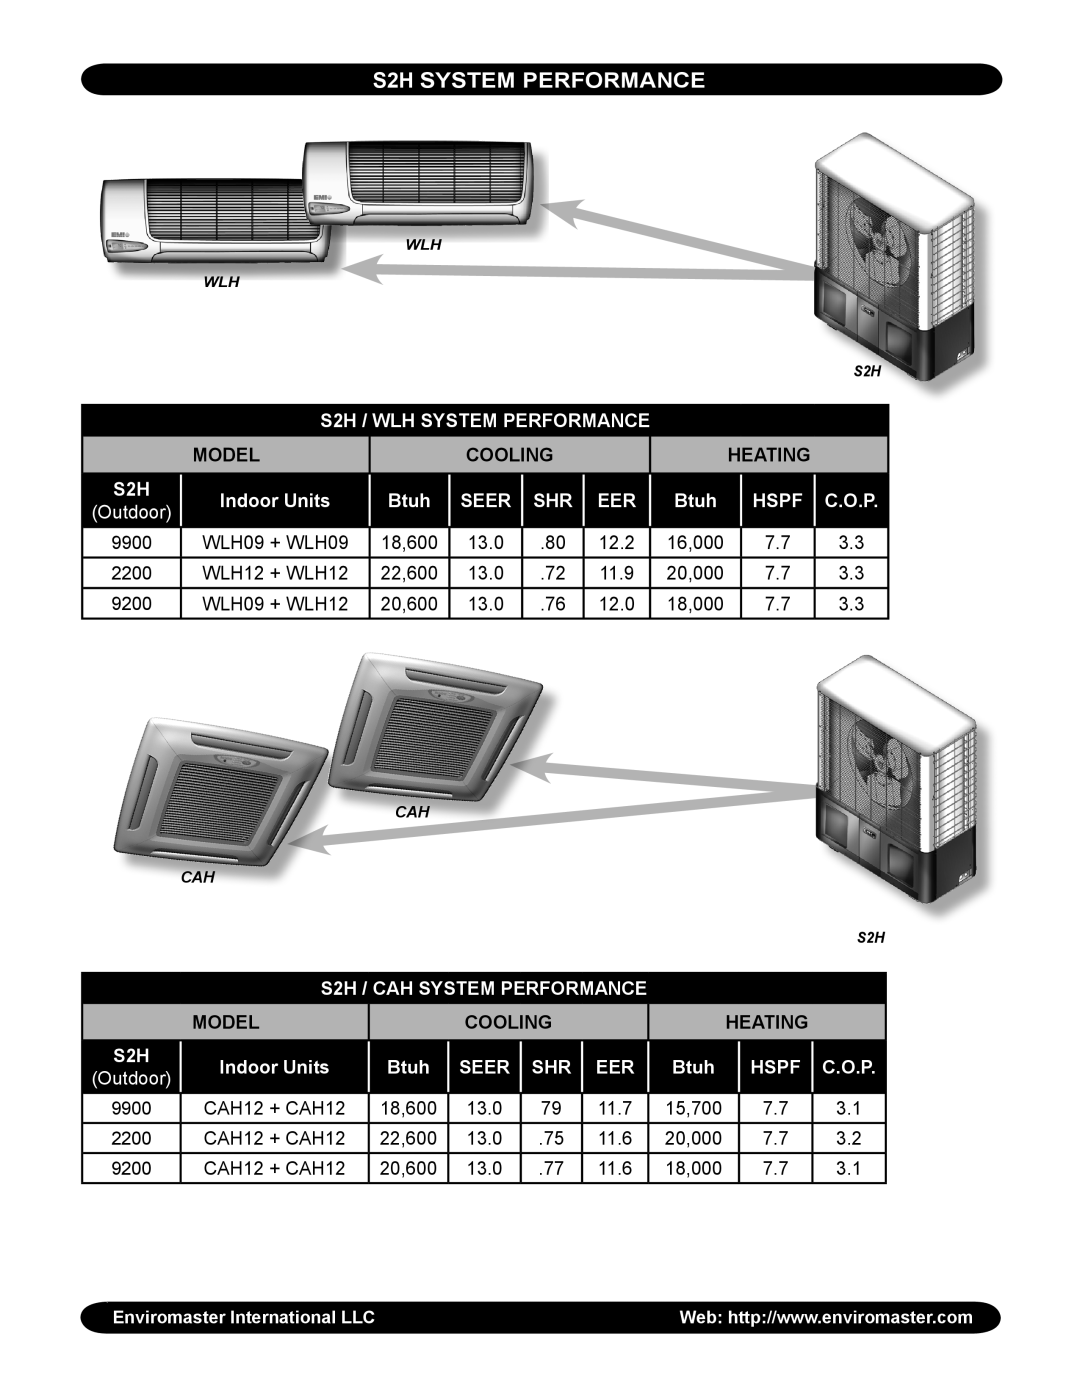 EMI specifications S2H System Performance, Model, Cooling, Heating, Outdoor 